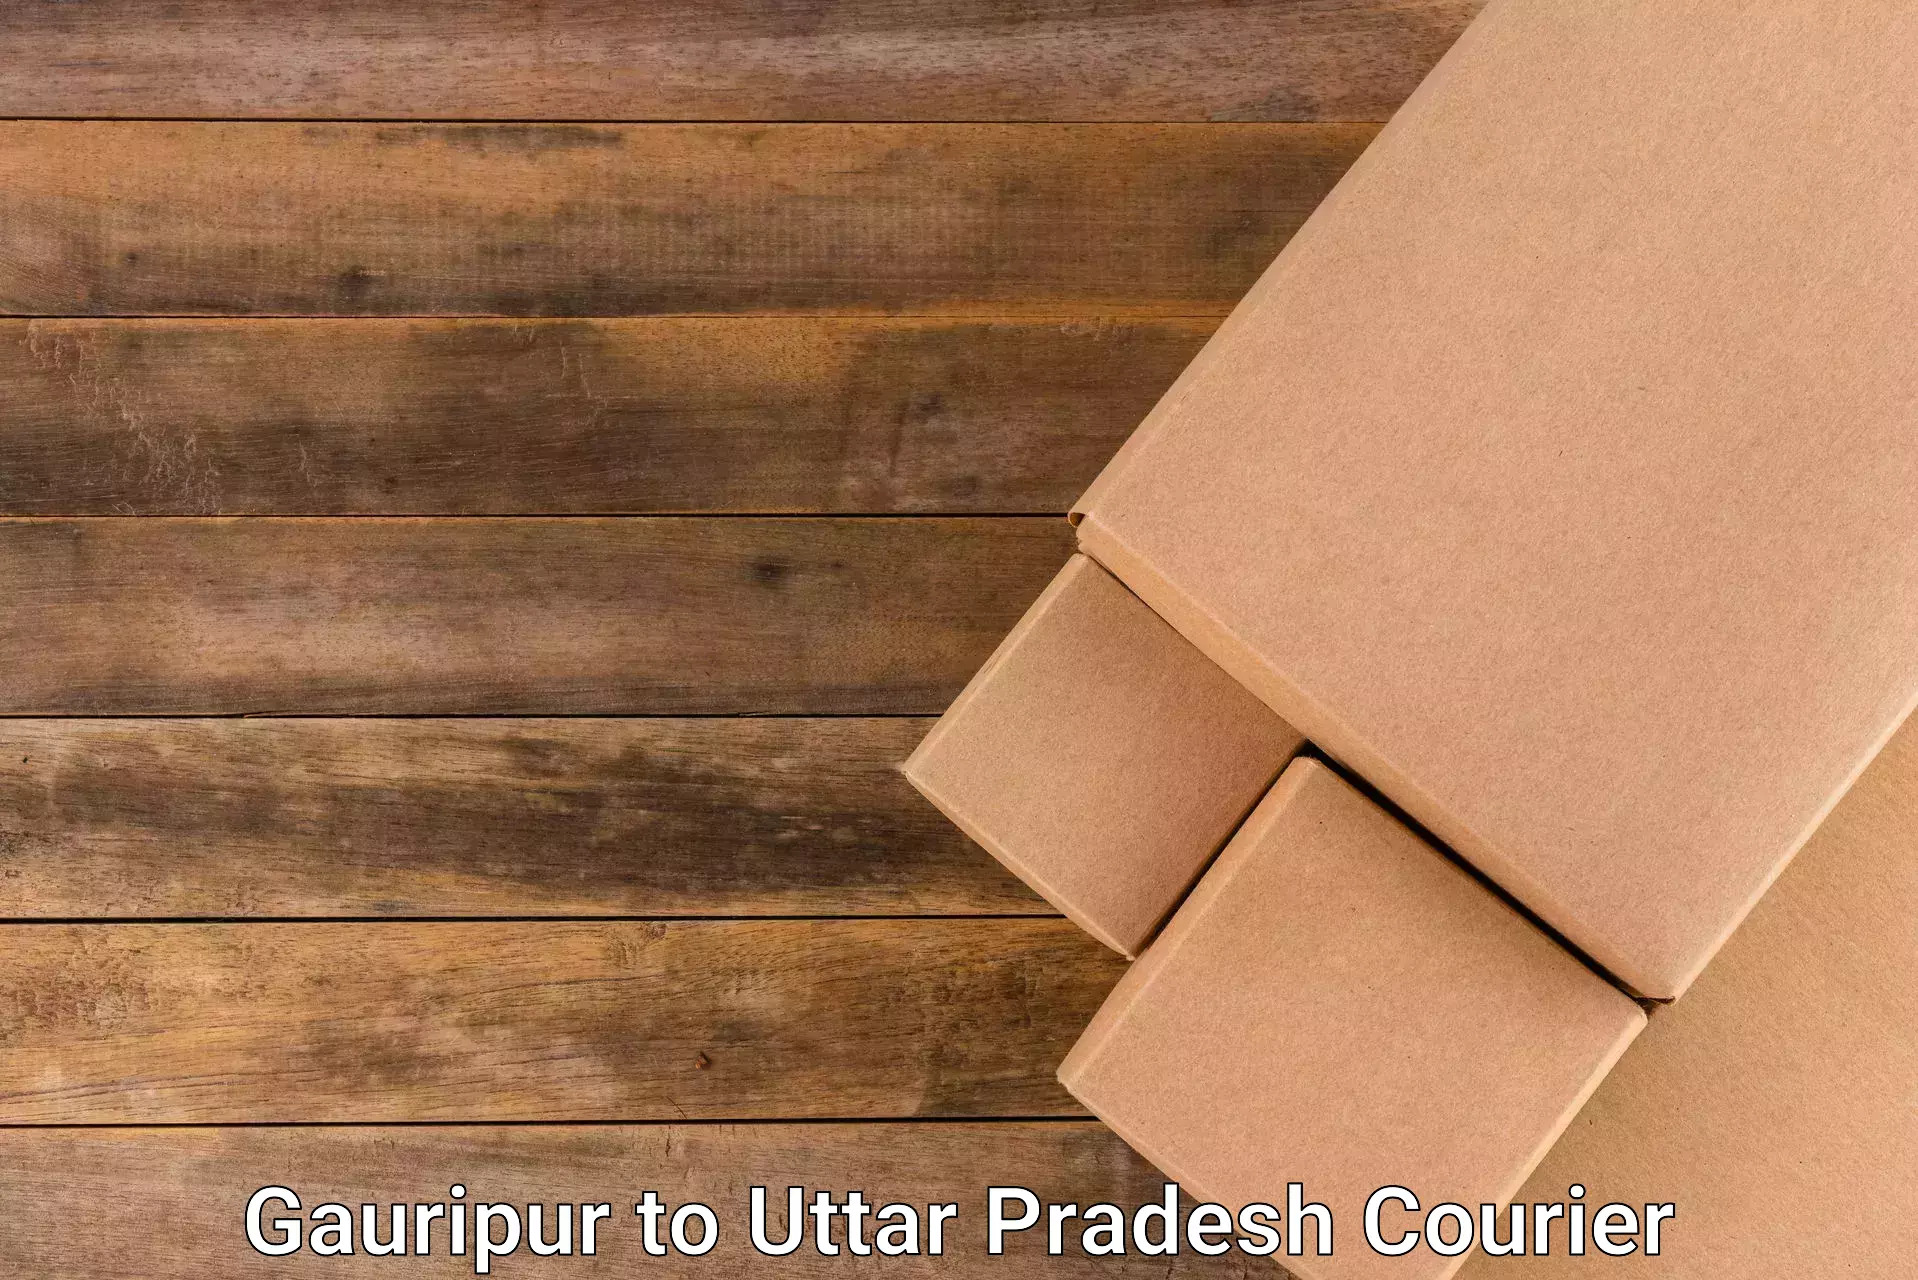 Comprehensive shipping network Gauripur to Saray Ankil